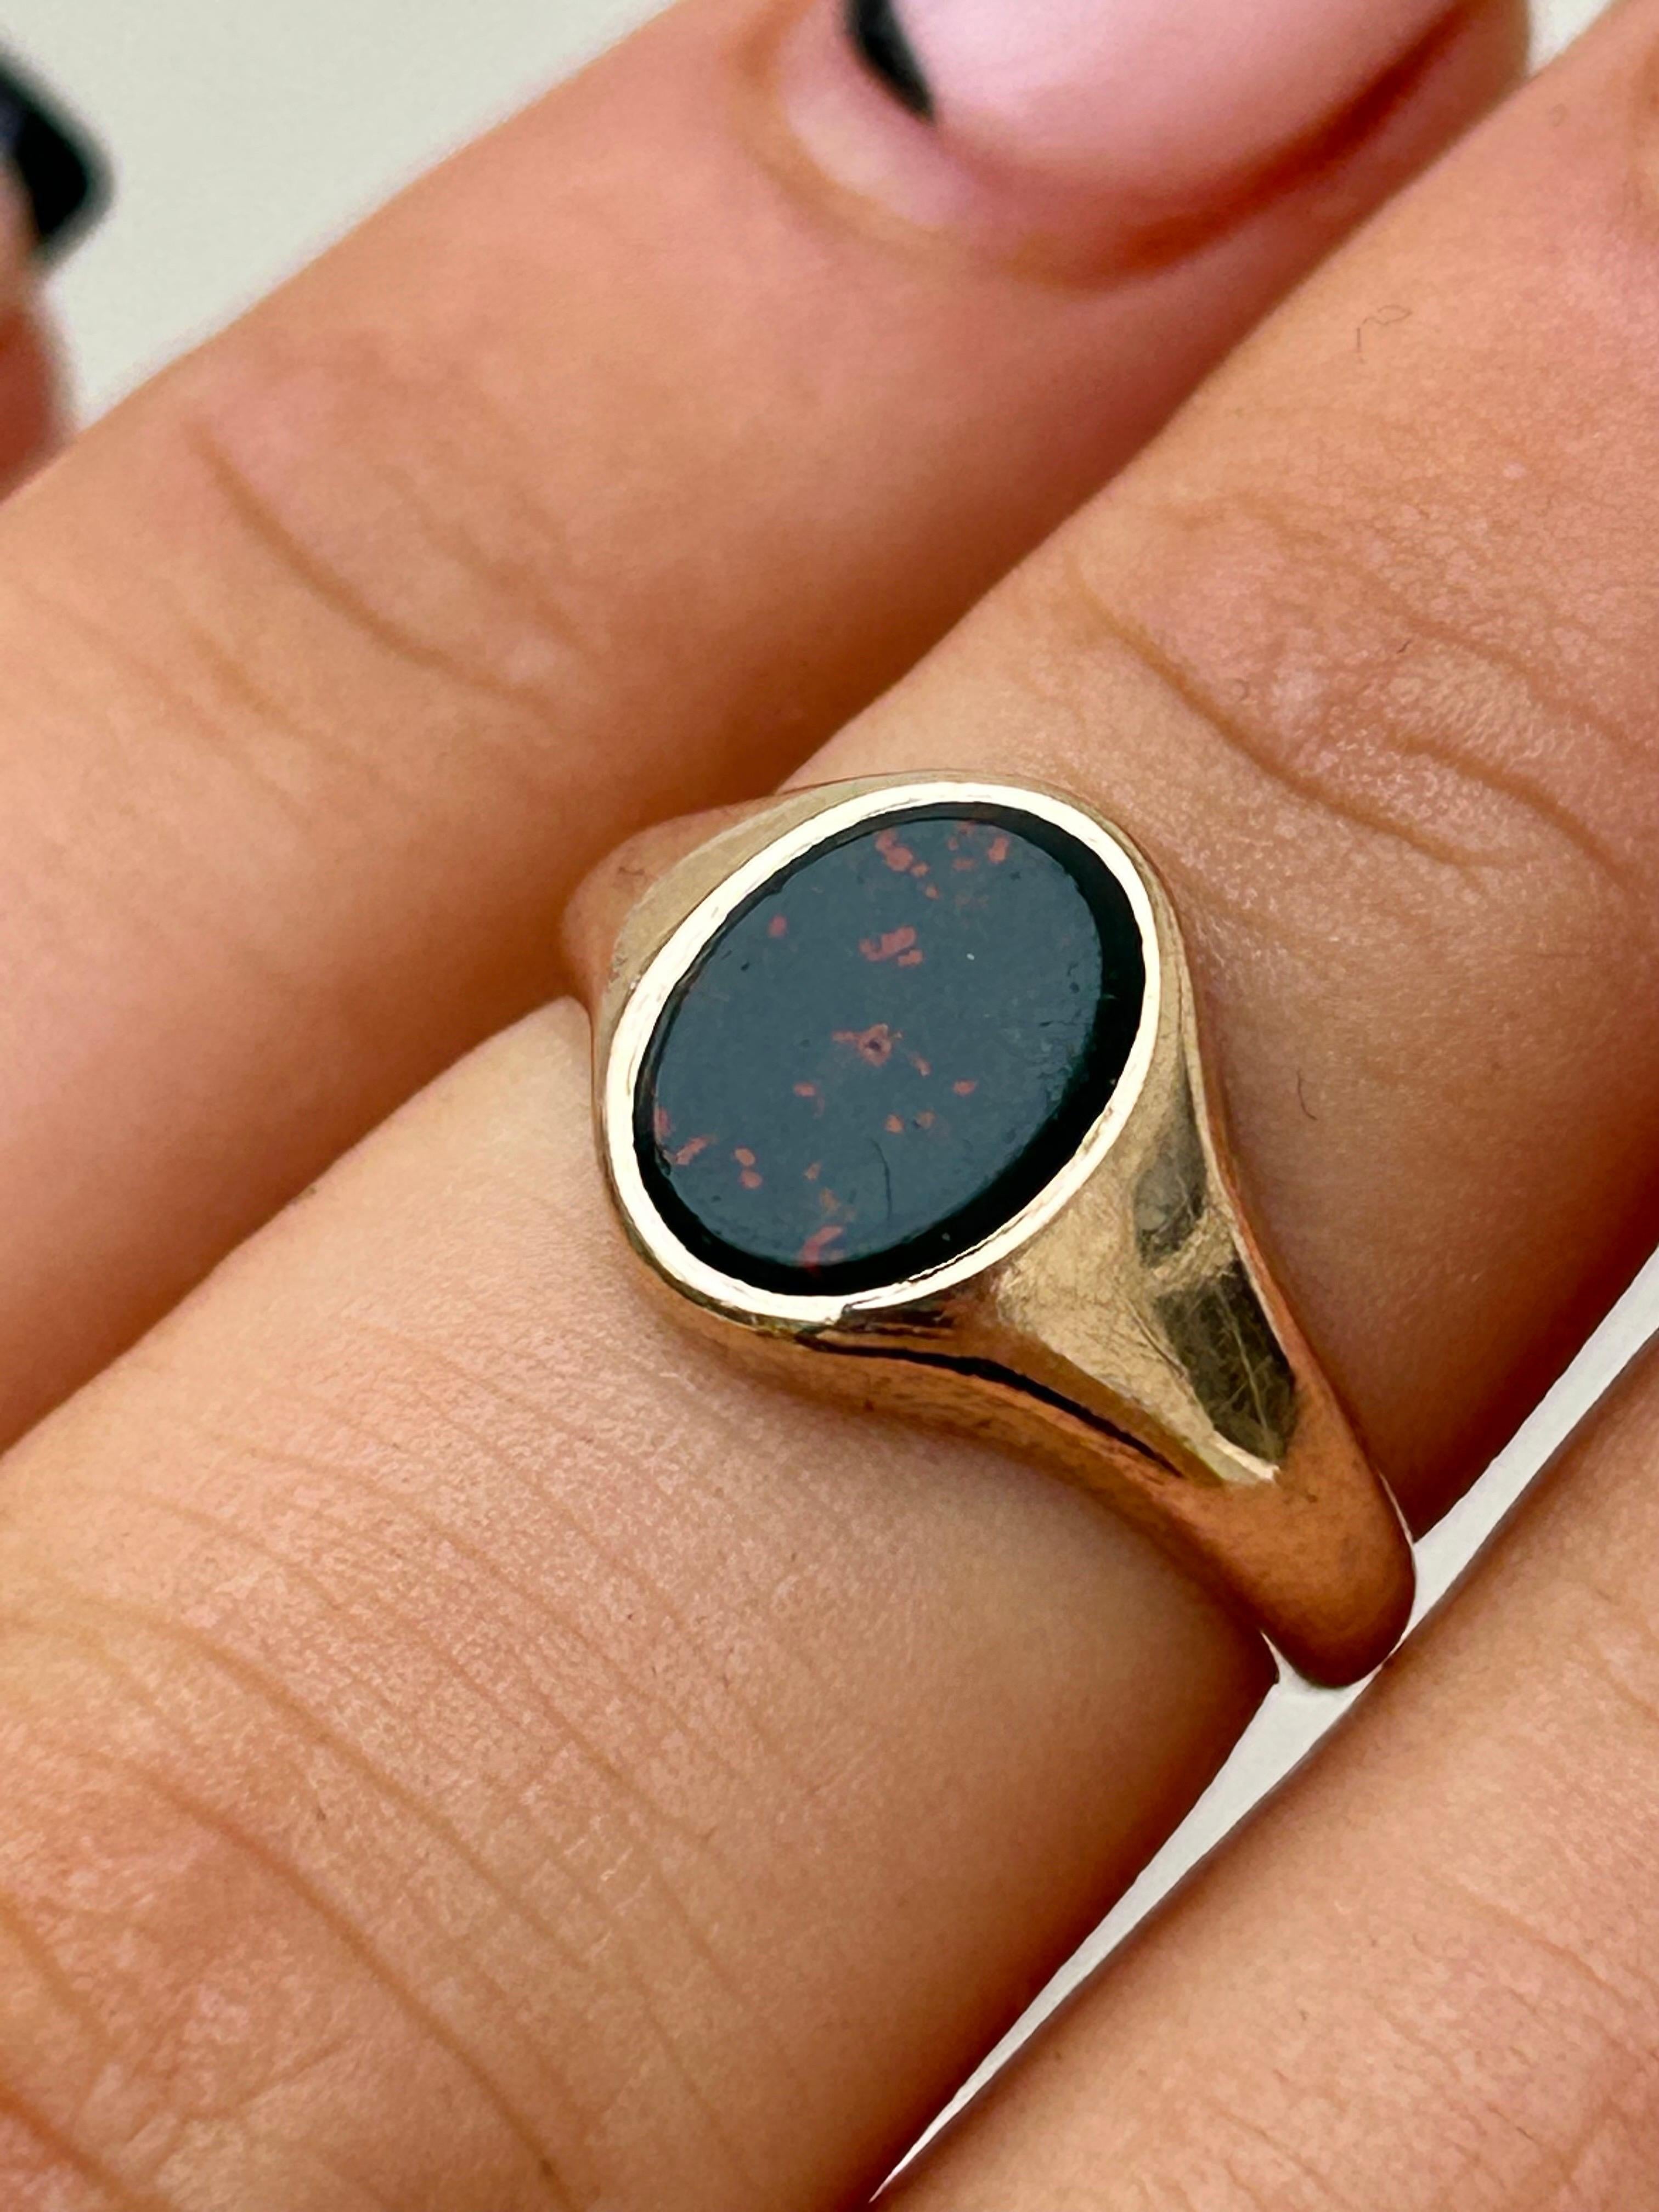 Antique Gold Bloodstone Signet Ring

wonderful unisex bloodstone signet 

The item comes without the box in the photos but will be presented in a gembank1973 gift box
 
Measurements: Weight 3g, size UK I US 43/4, head of ring 9mm x 7mm, height off